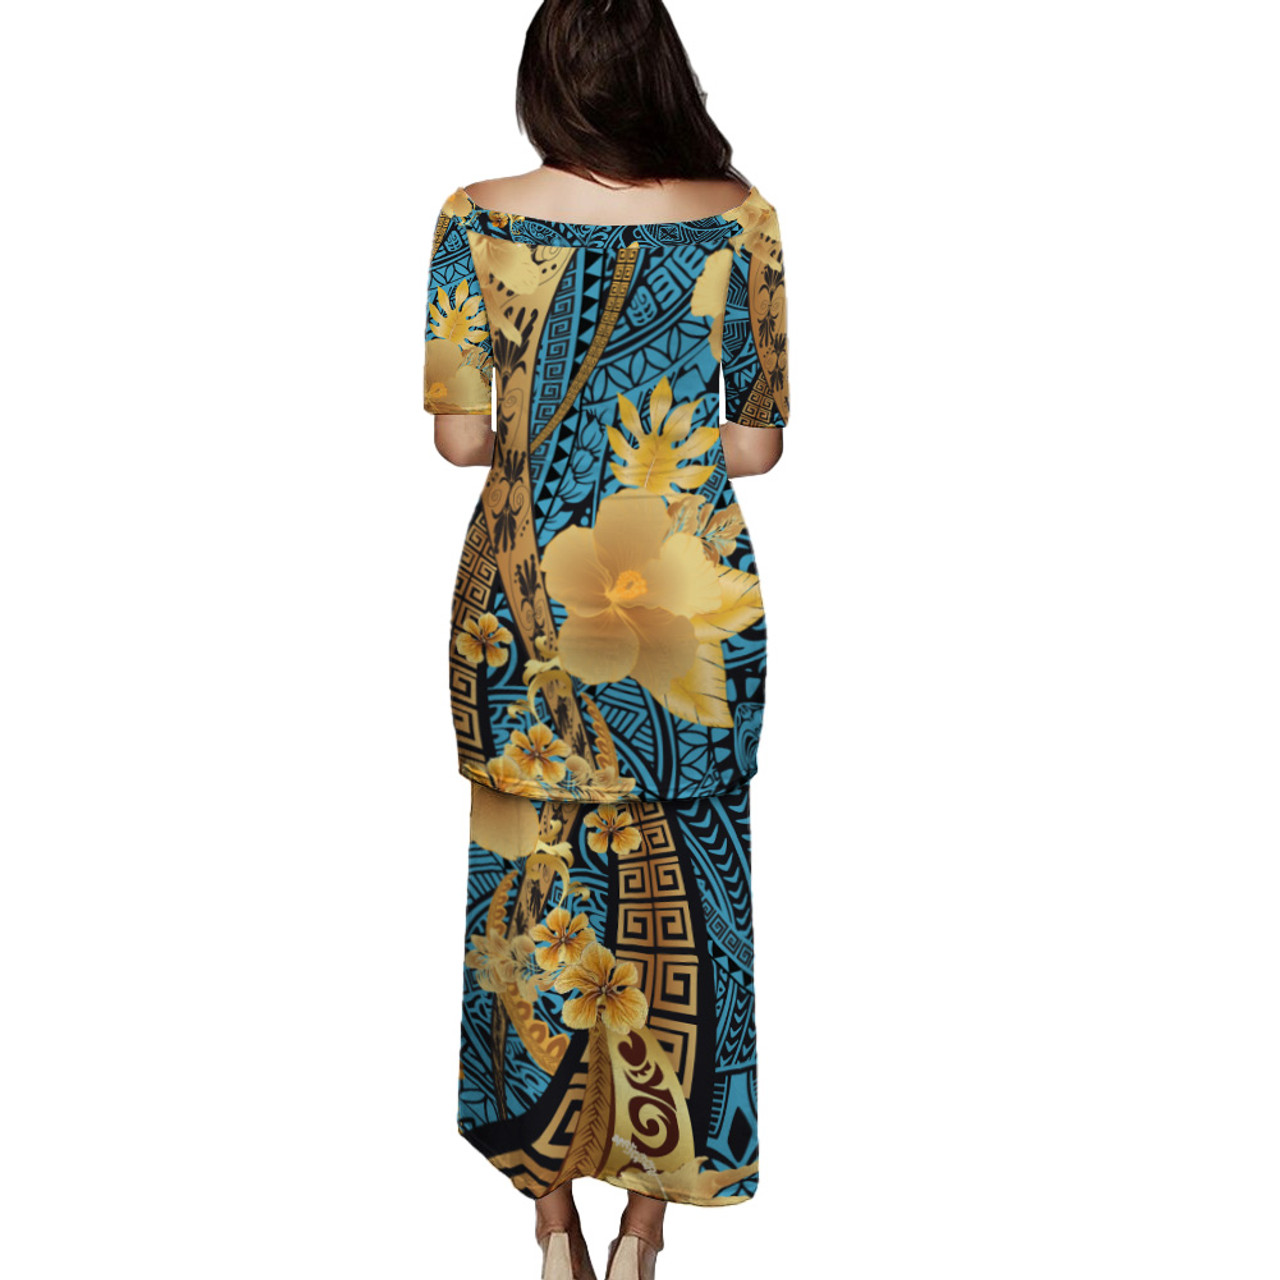 Polynesian Tribal Patterns Hibiscus Flowers Golden Color Puletasi And Shirt